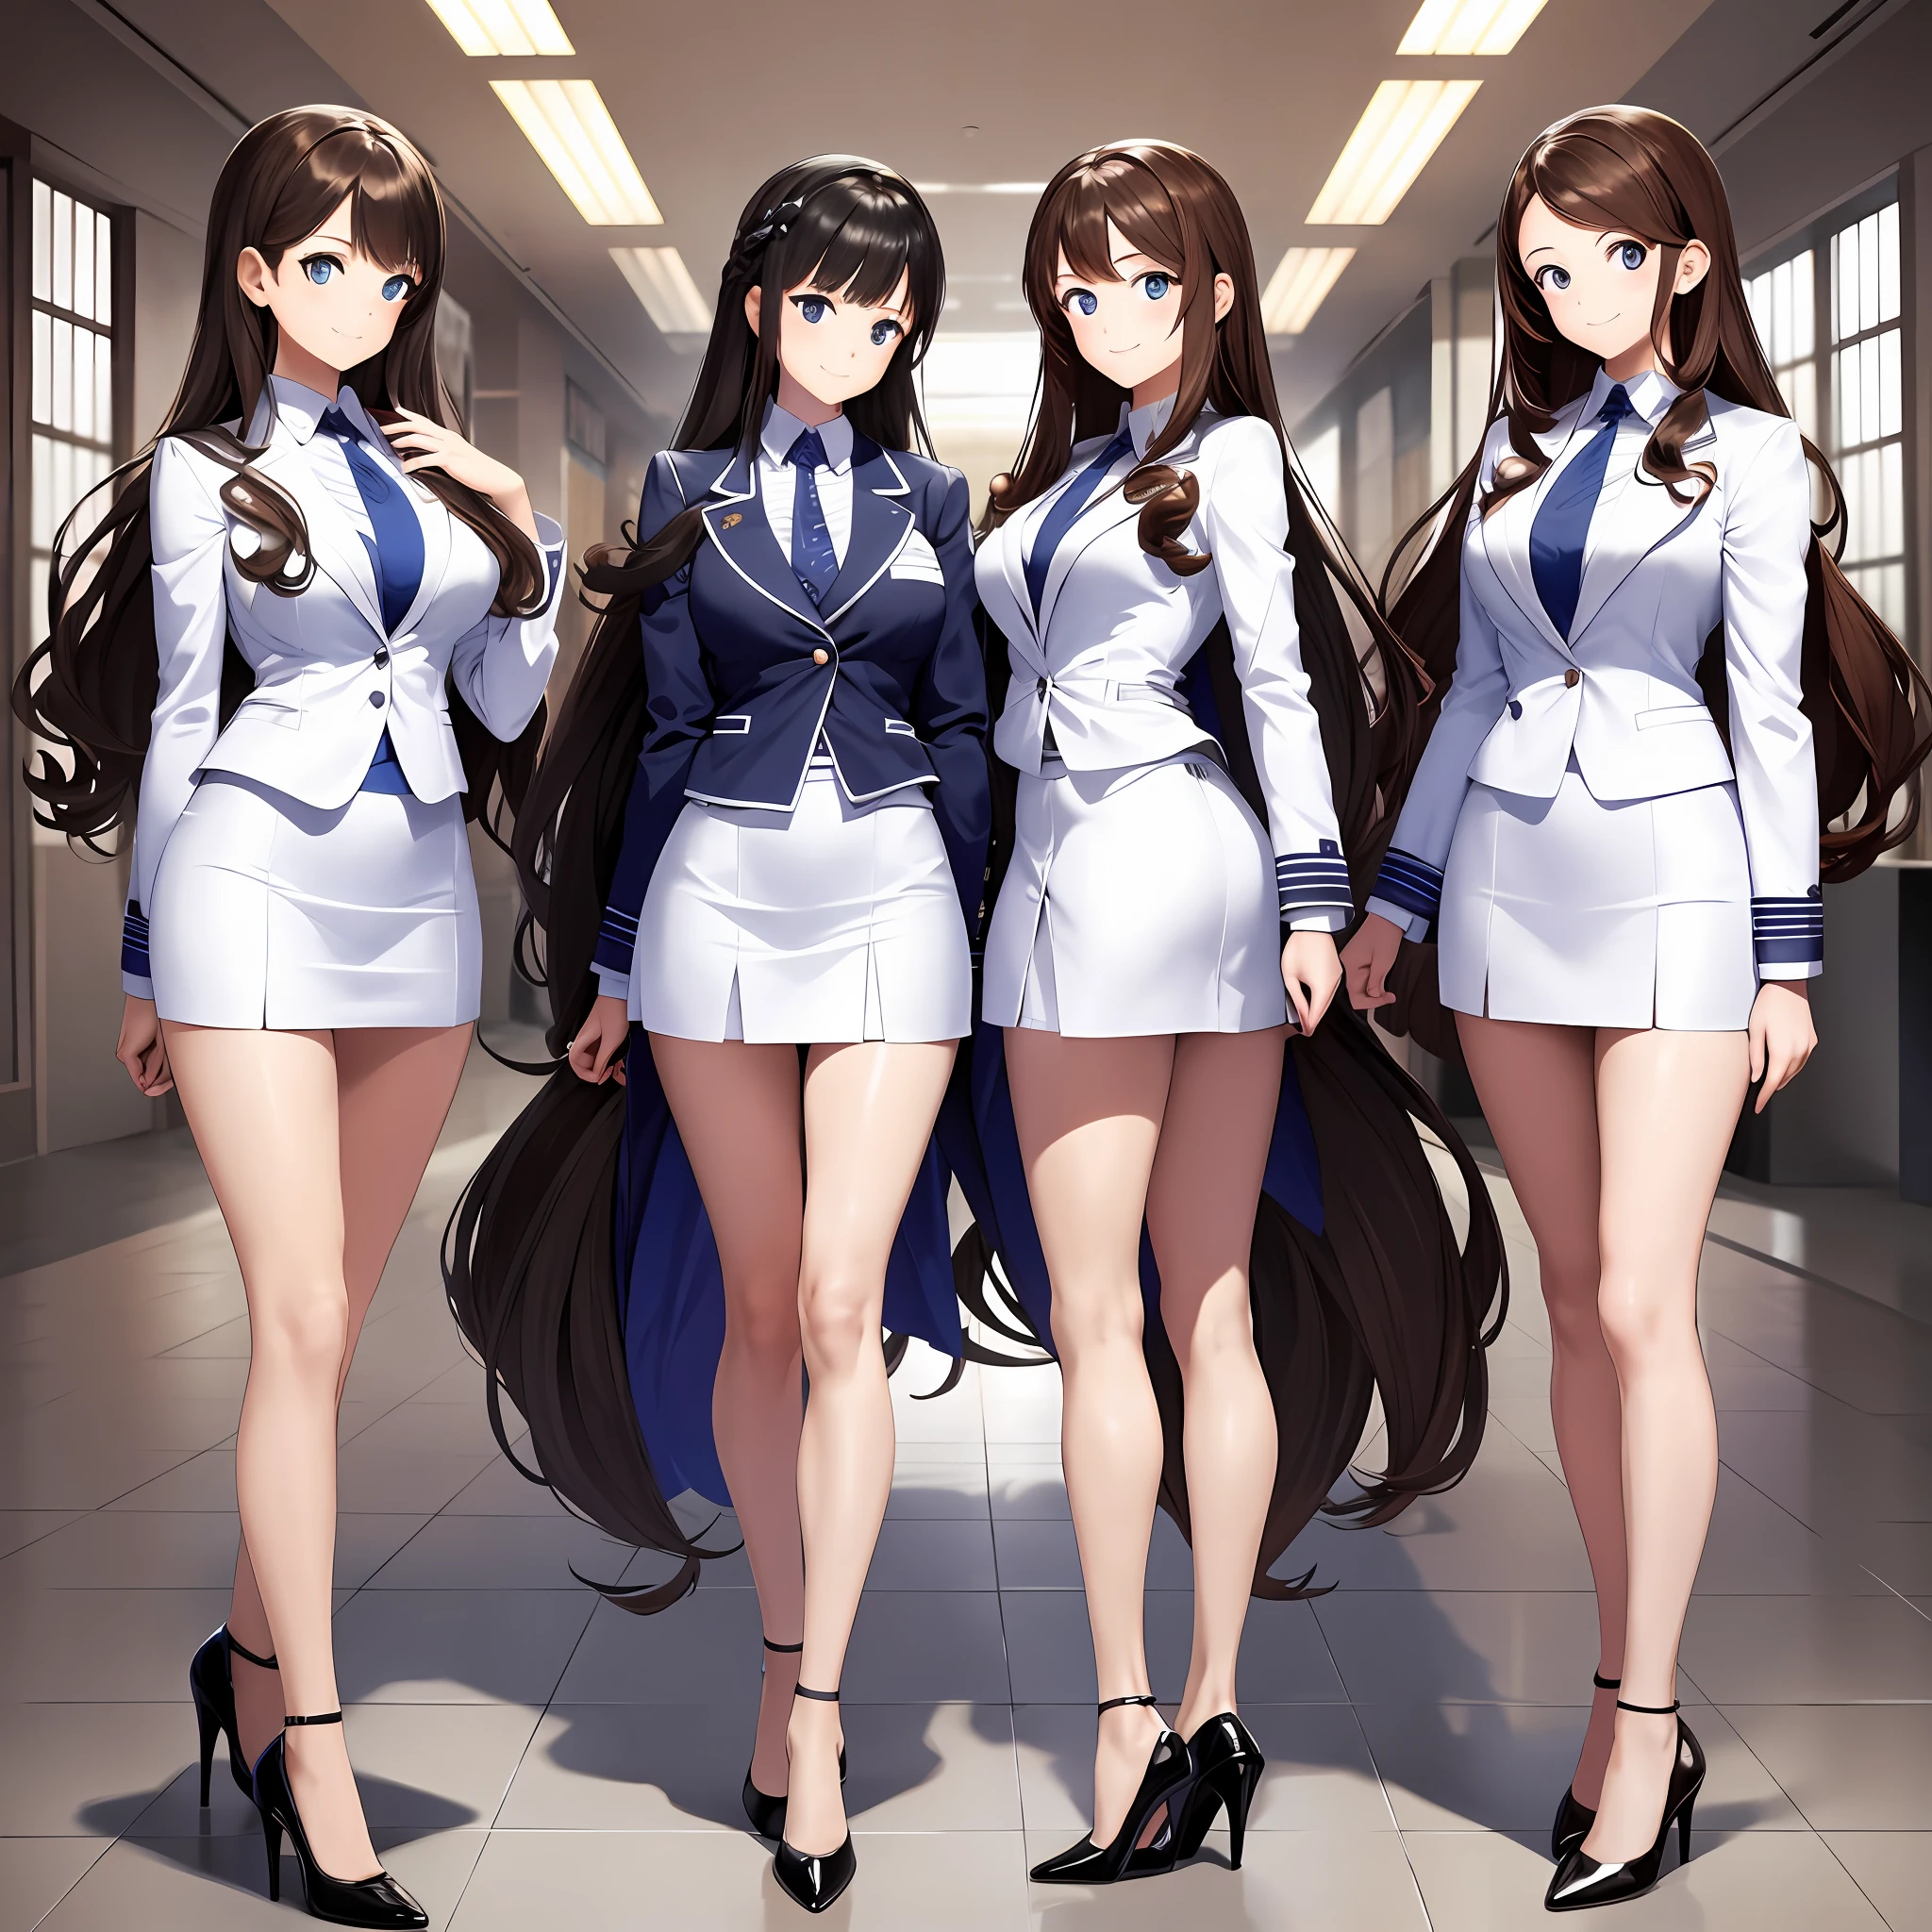 perfect anime illustration, multiple girls, thousands of girls, millions of girls, clones, identical sisters, brown hair, curly hair, long hair, matching hairstyle, hazel eyes, smiling, white skin, business attire, blue skirt suit, pencil skirt, black high heels, matching outfits, uniforms, businesswomen, highres, office, full body, bare legs, neat rows of sisters, neat columns of sisters, sisters standing in formation, sisters in background